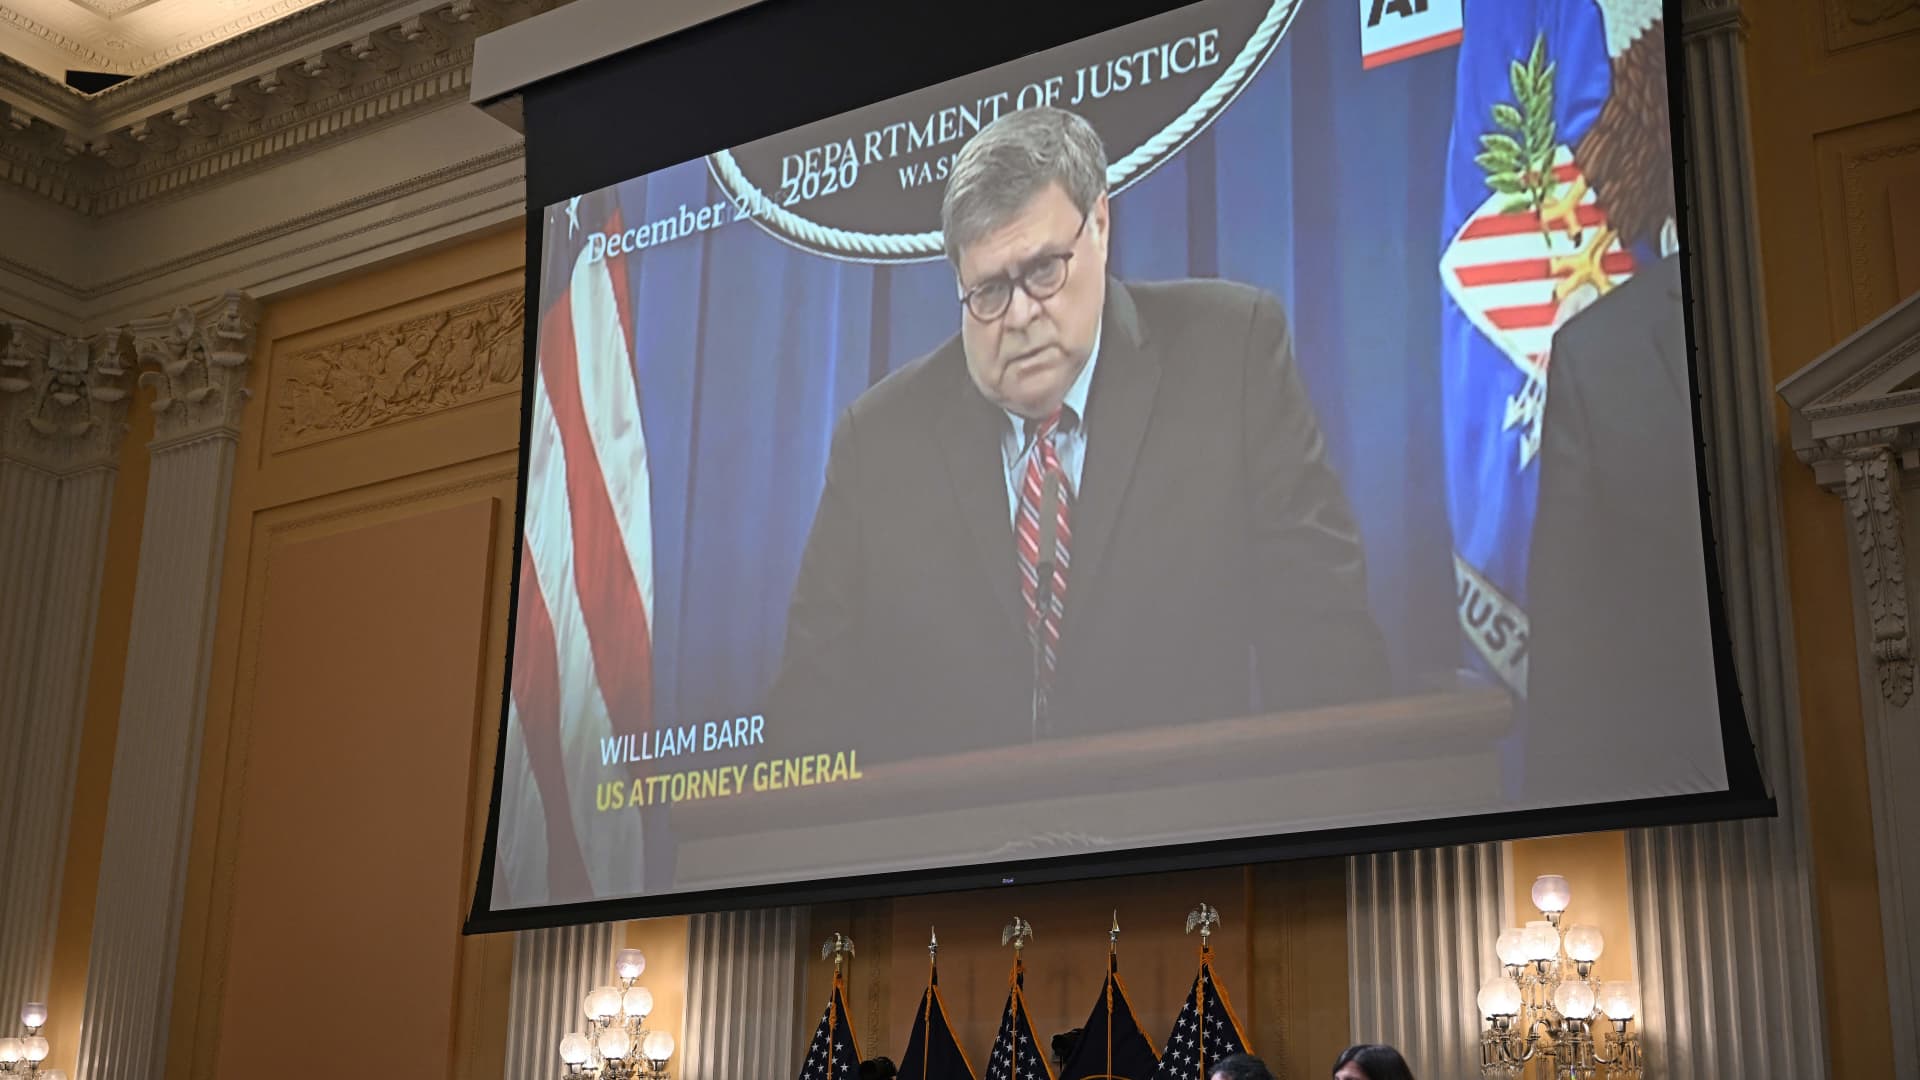 A video of former Attorney General William Barr speaking is shown on a screen during the fifth hearing by the House Select Committee to Investigate the January 6th Attack on the US Capitol in the Cannon House Office Building in Washington, DC, on June 23, 2022.